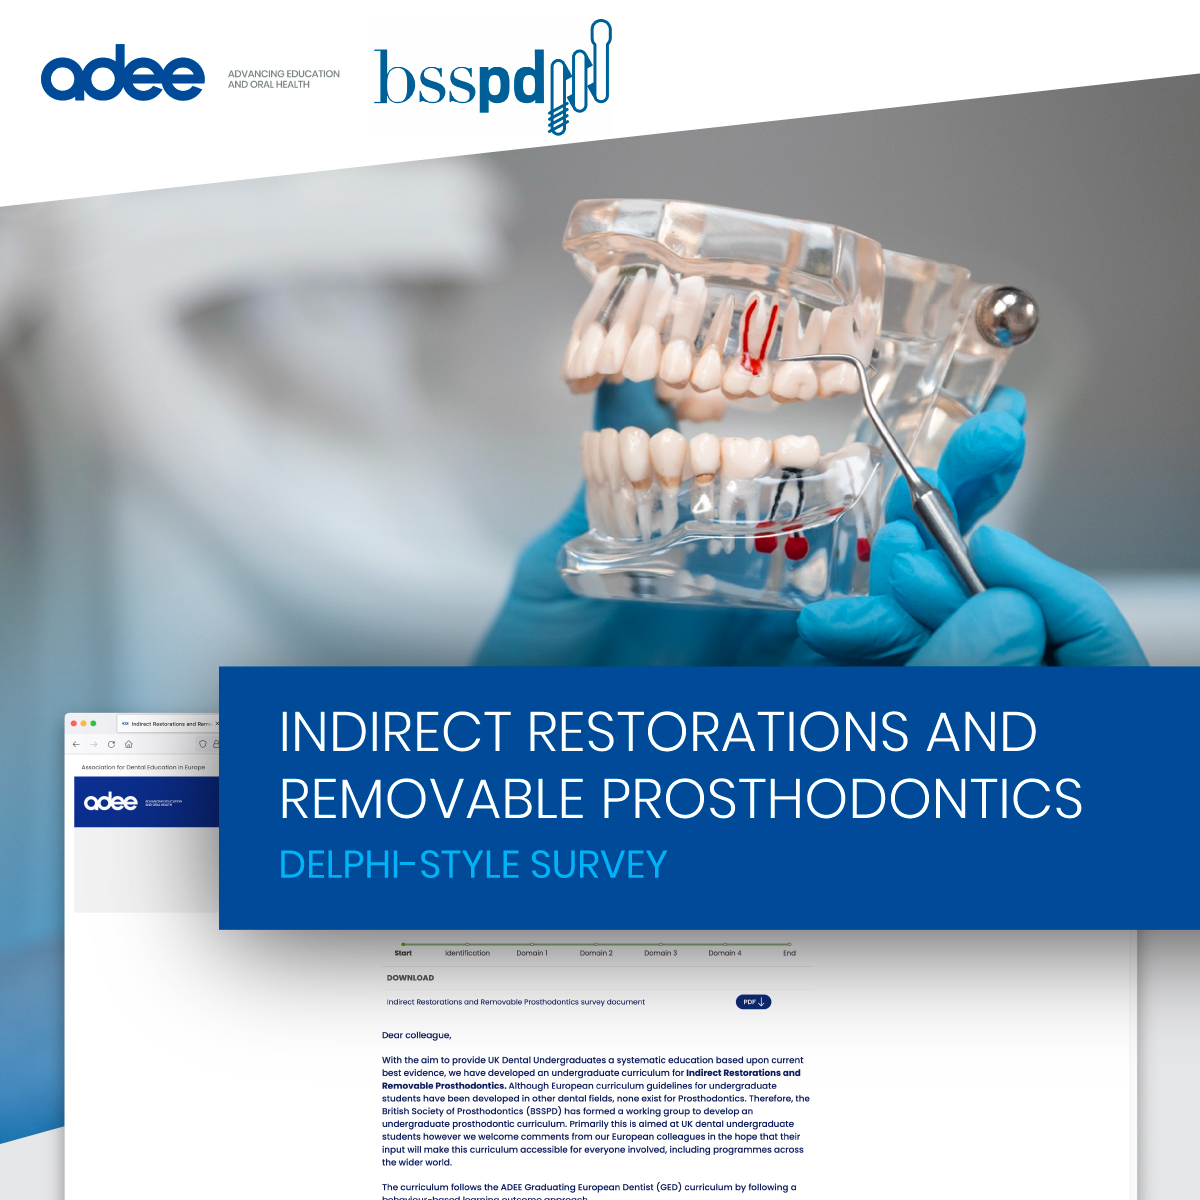 Join the dental education revolution with BSSPD! Shape a global curriculum for Indirect Restorations and Removable Prosthodontics. Share insights in our survey: adee.org/indirect-resto…. #adee #ElevateDentalEd #BSSPDRevolution #GlobalDentalInsights #Prosthodontics #Proscurriculum